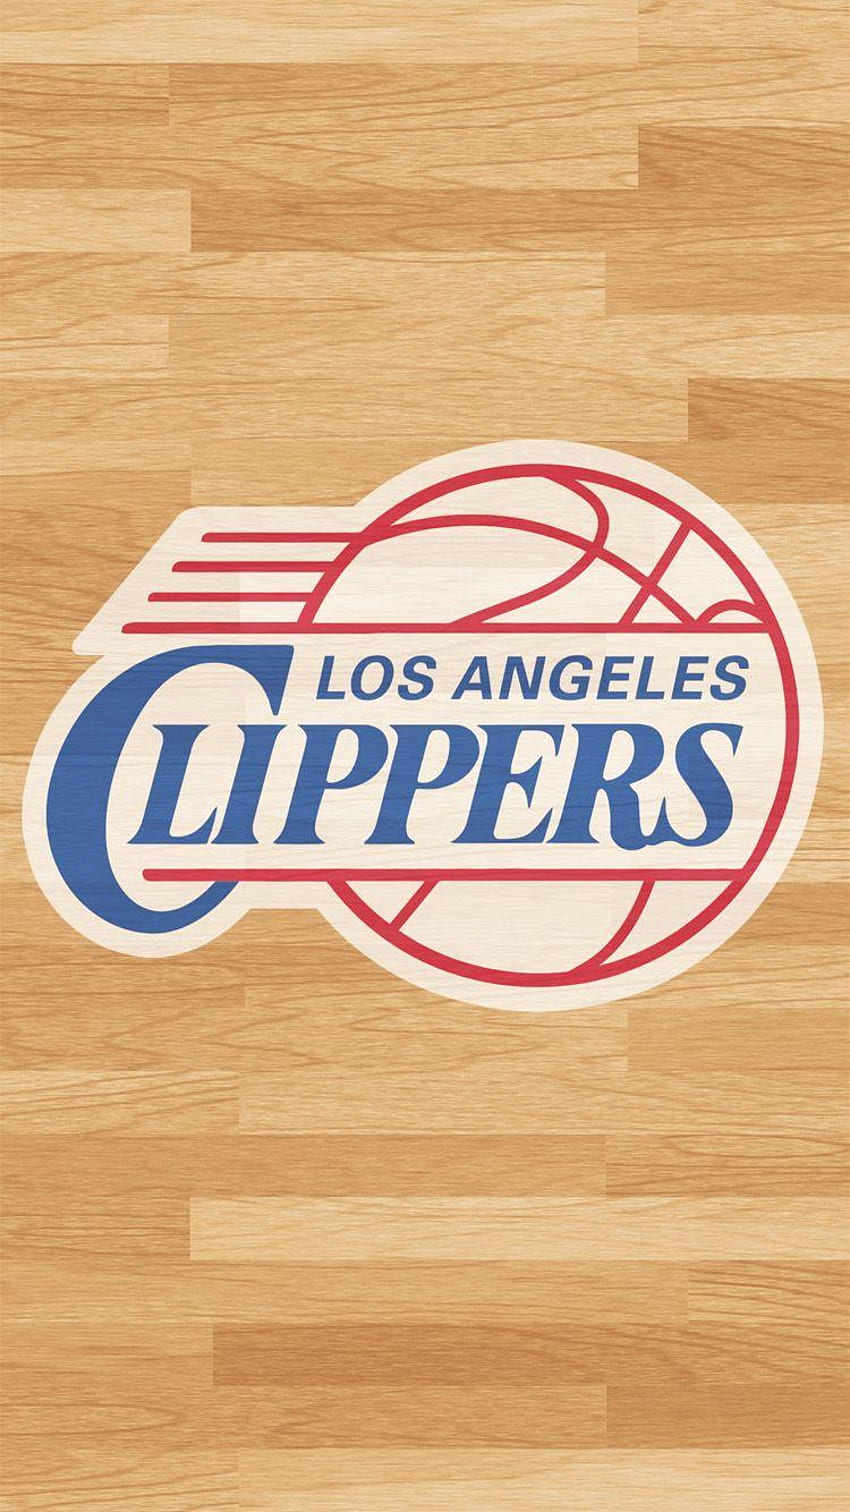 Los Angeles Clippers HD phone wallpaper